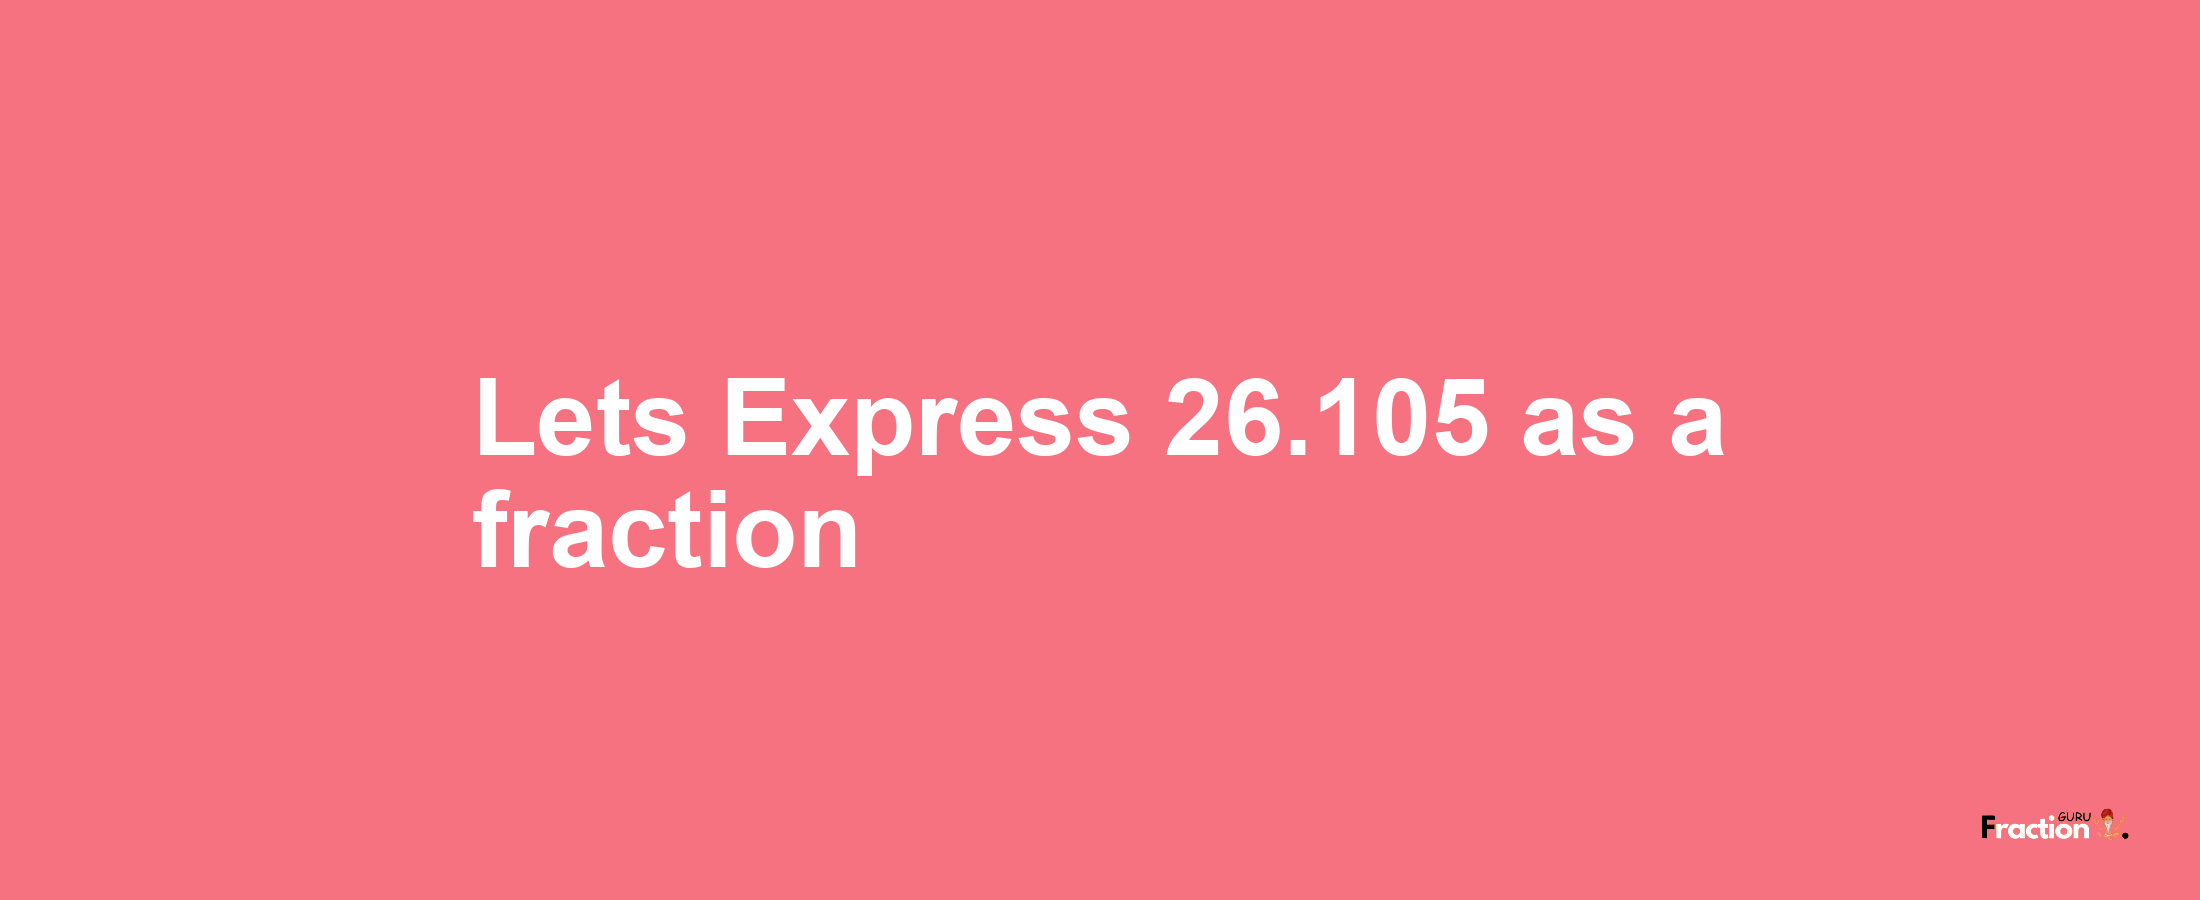 Lets Express 26.105 as afraction